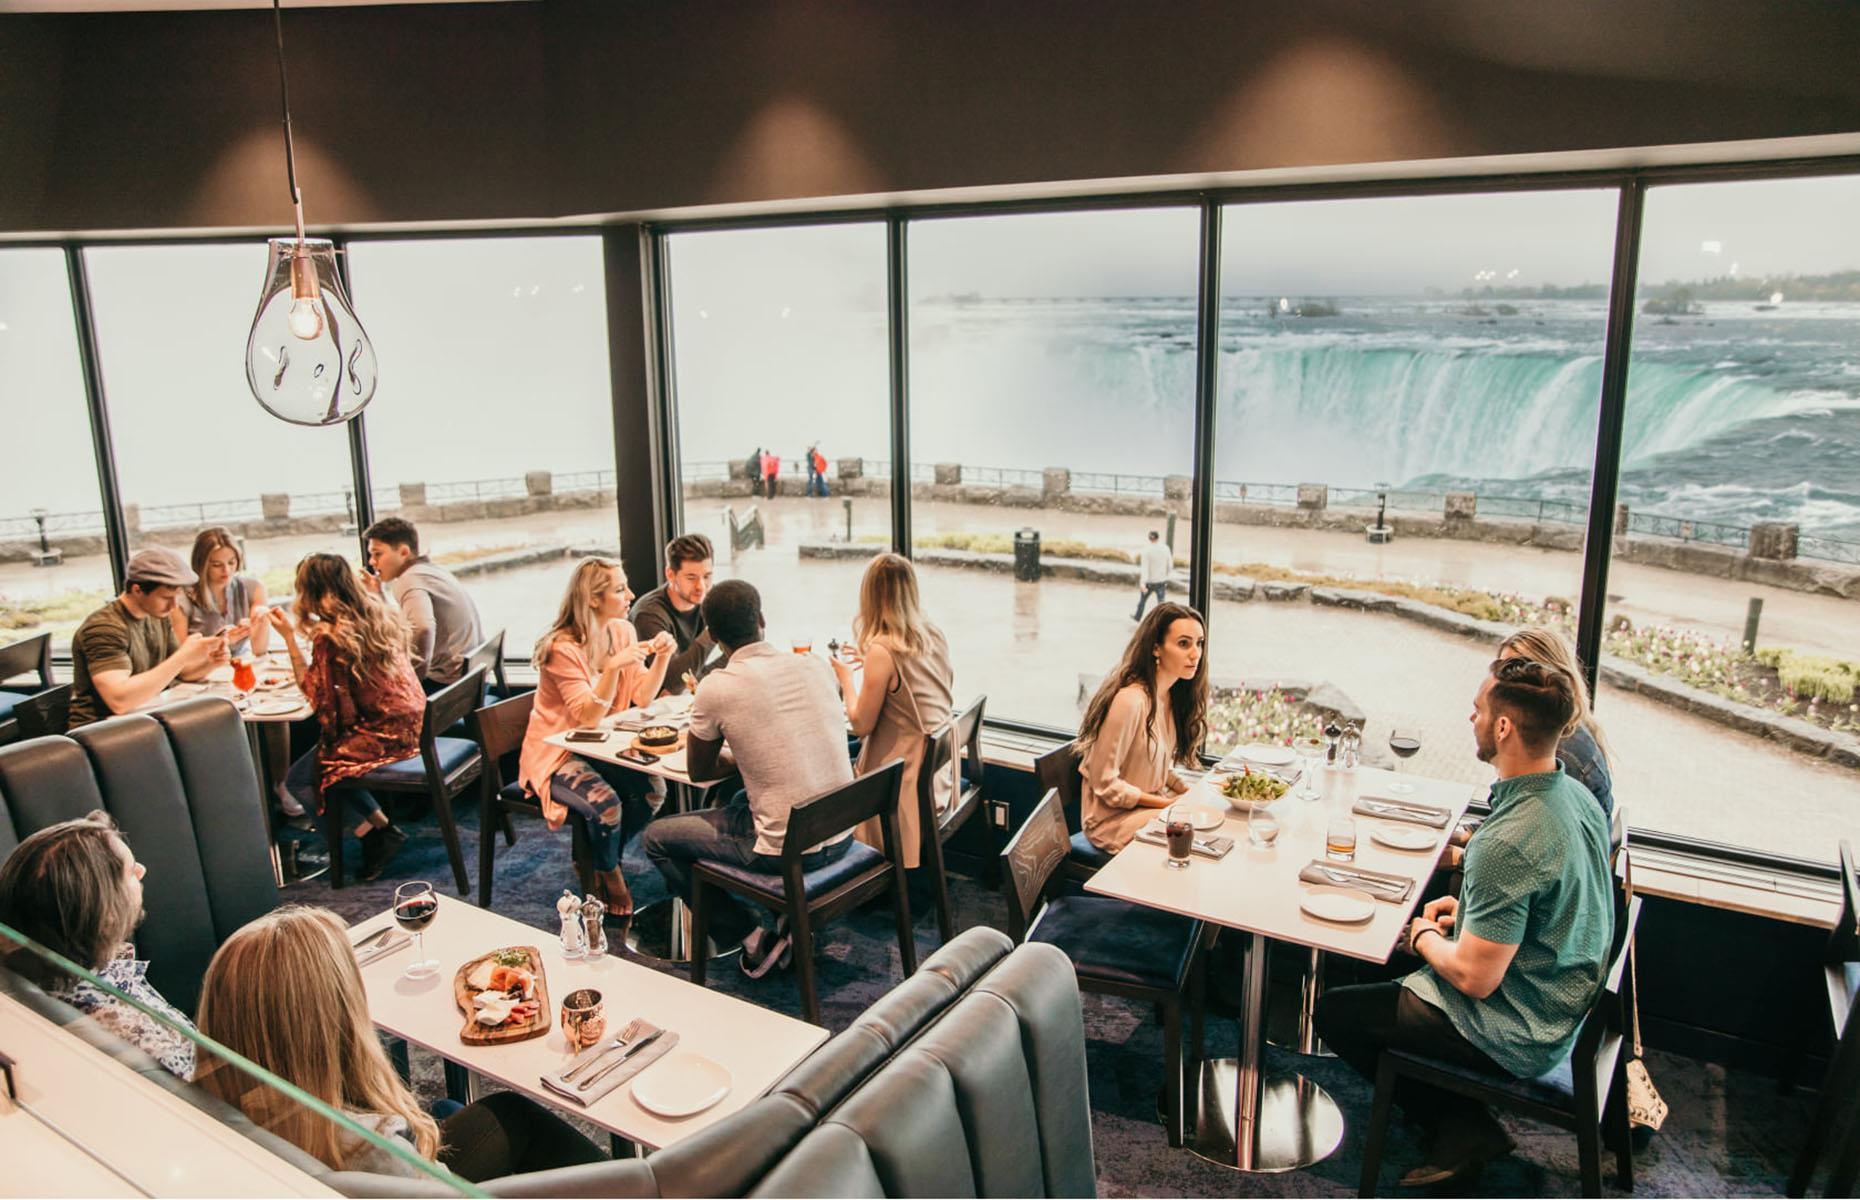 <p>One thing’s for certain, you won’t go hungry in Niagara Falls, and arguably the best seats in town go to <a href="https://www.niagaraparks.com/visit/culinary/table-rock-house-restaurant/">Table Rock House</a>. Directly over the road from Horseshoe Falls, you’re practically perched on the edge of the natural wonder.</p>  <p>For starters, you can’t go wrong with the Ontario burrata, served with pickled aubergine, toasted pine nuts, and heirloom tomatoes. The fried vegetable dumplings with kimchi, spring onions, and gochujang (red chili paste) are extremely moreish too.</p>  <p>Burger and sandwich offerings include a chicken schnitzel BLT, Atlantic lobster roll, and Canadian prime rib burger. This is a lunch to remember, no matter what you choose.</p>